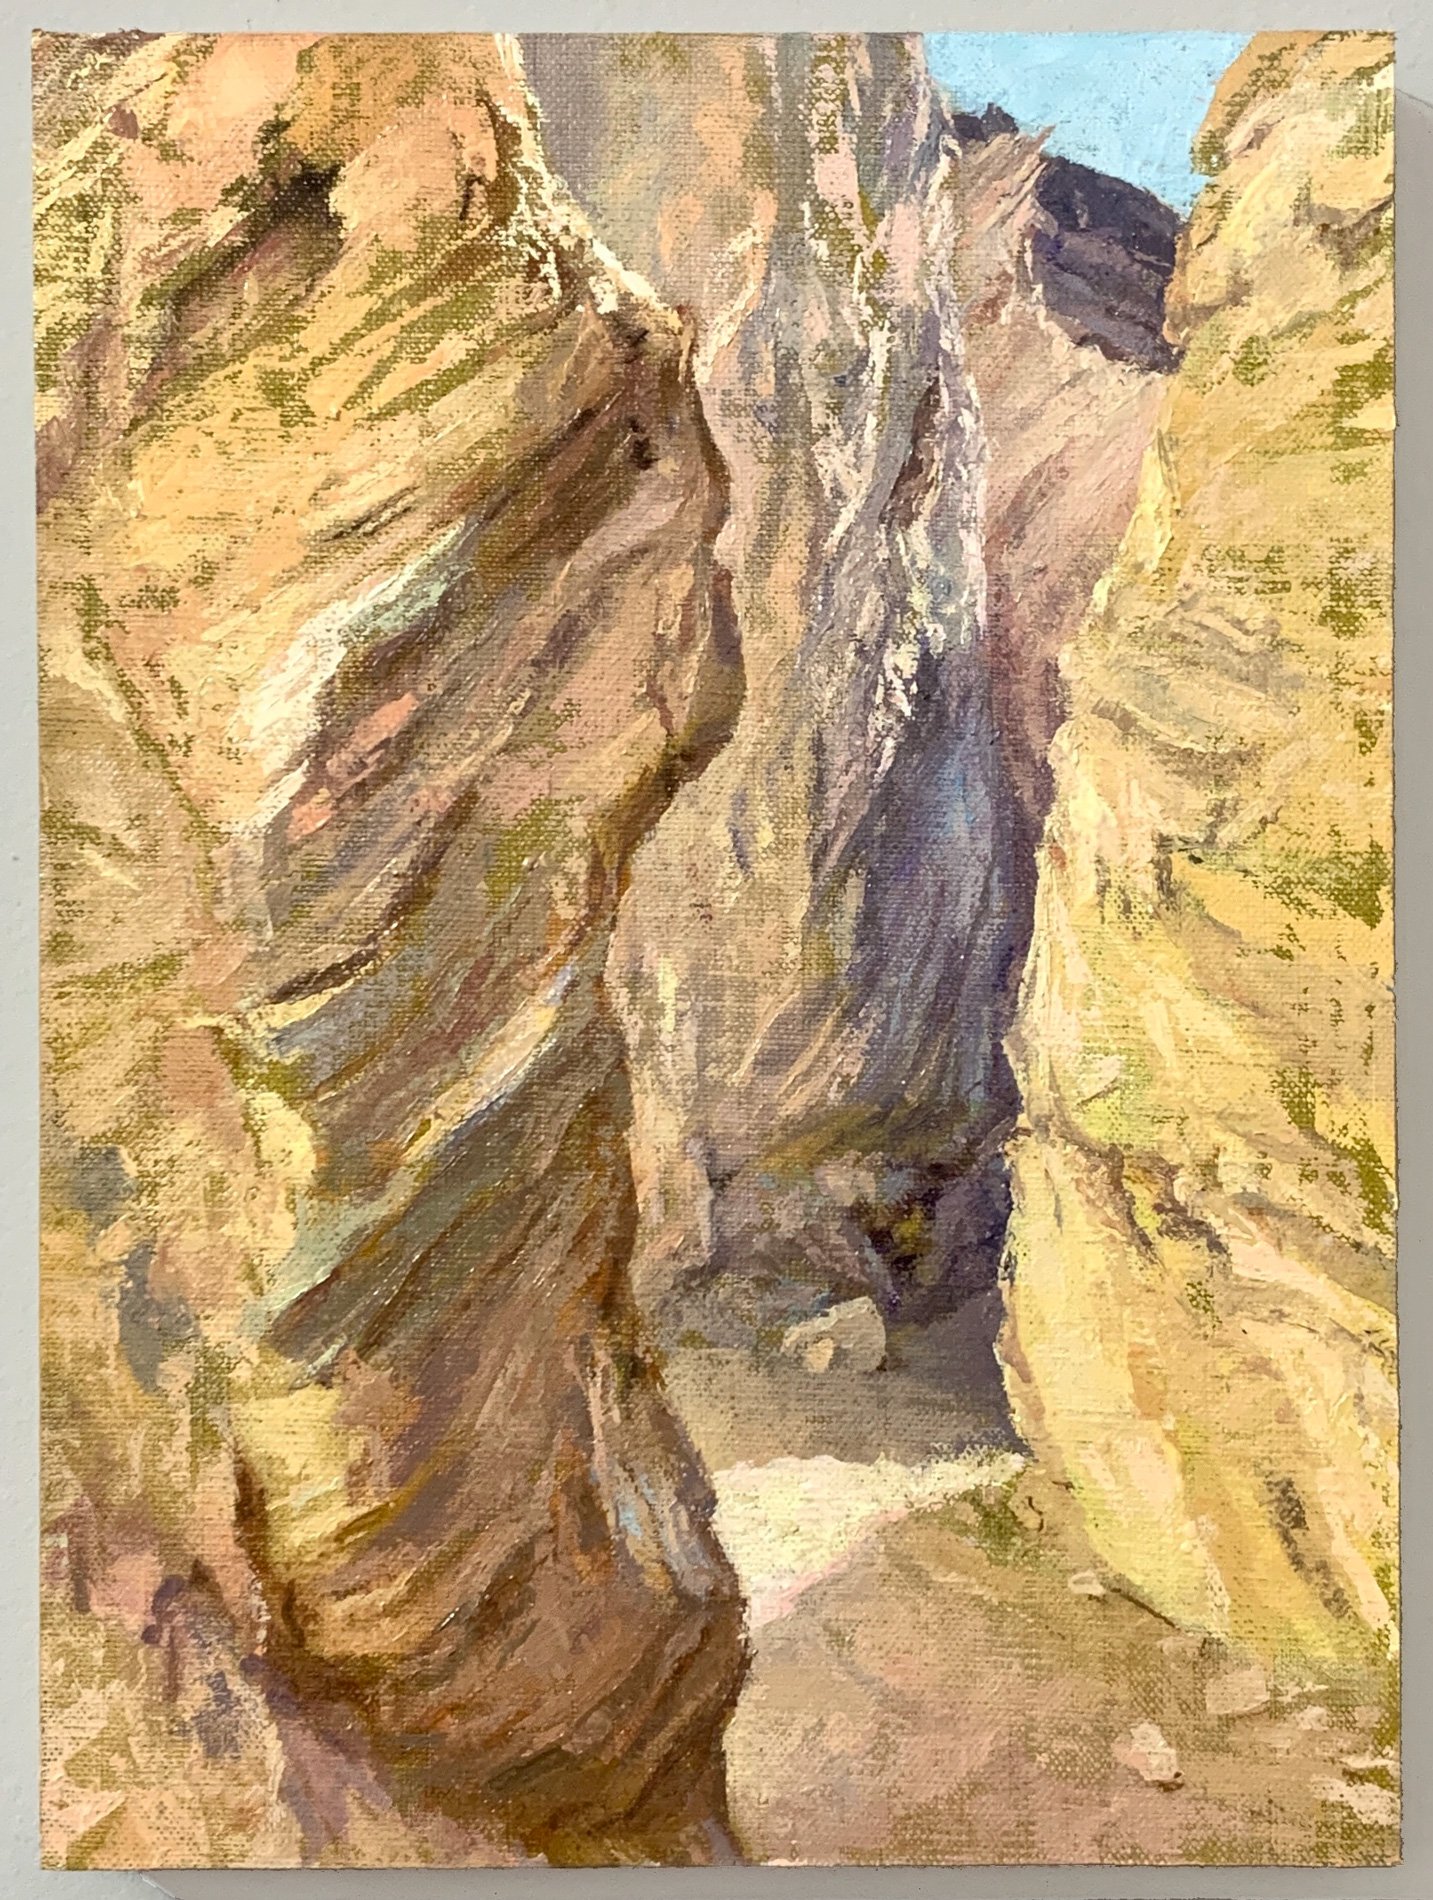  Golden Canyon, 2020 oil on muslin on panel, 12 x 9 in 